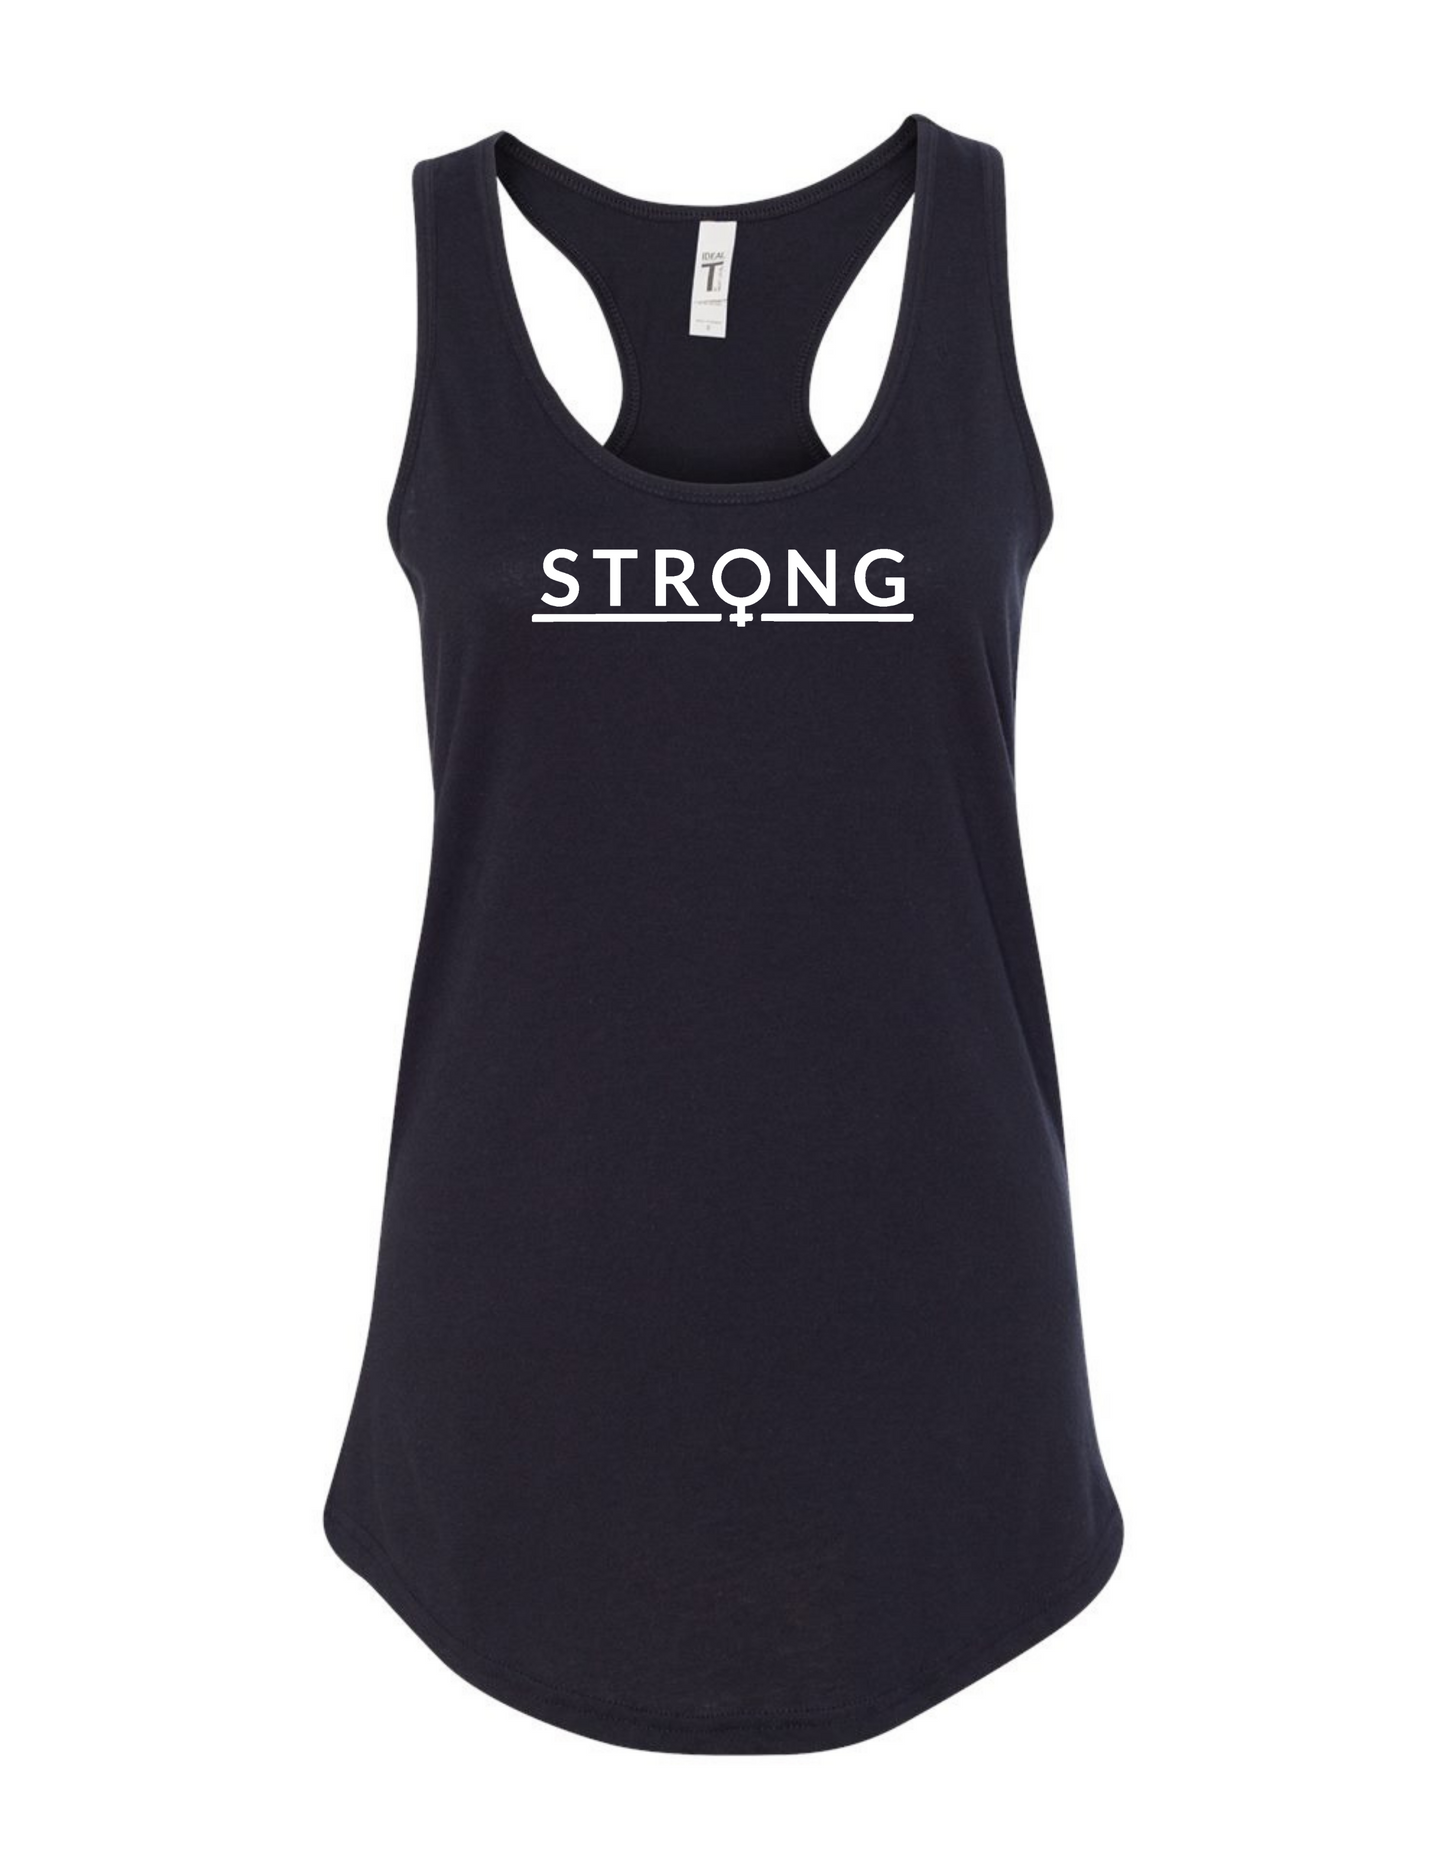 Strong - Racerback Ladies Tank - Mister Snarky's